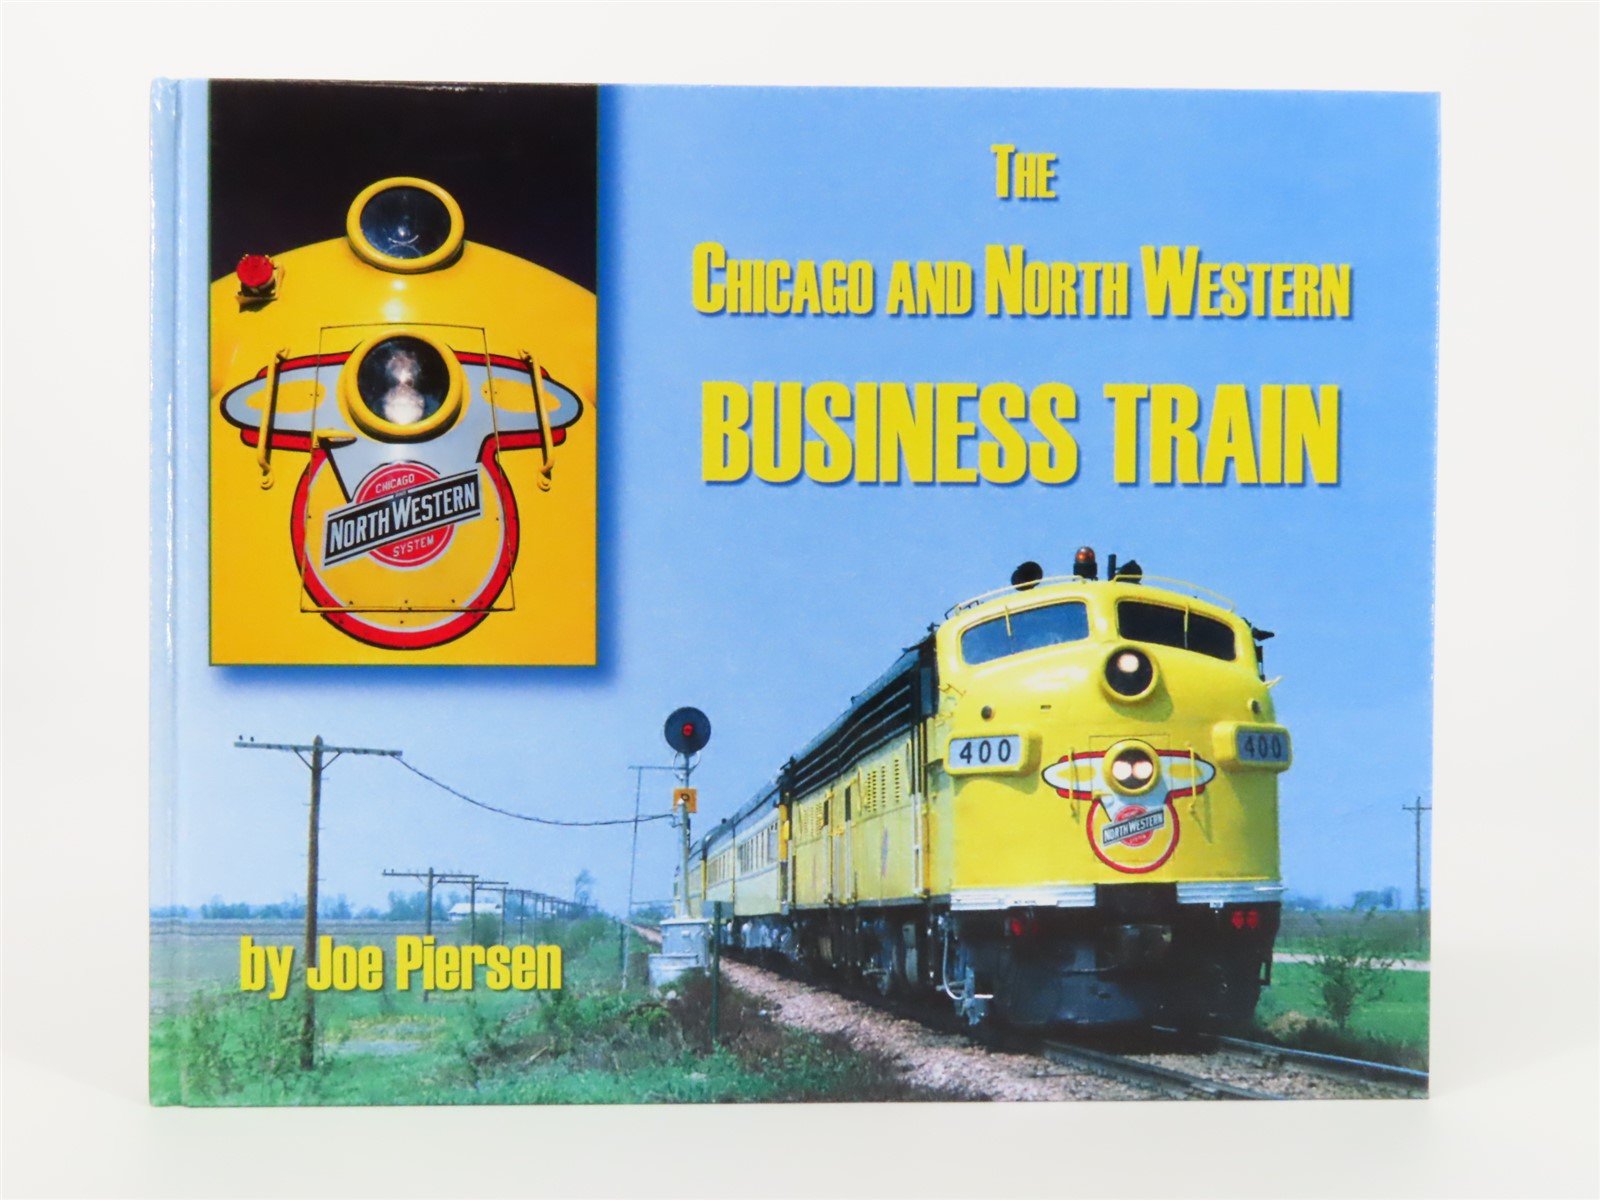 The Chicago And North Western Business Train by Joe Piersen ©2005 HC Book